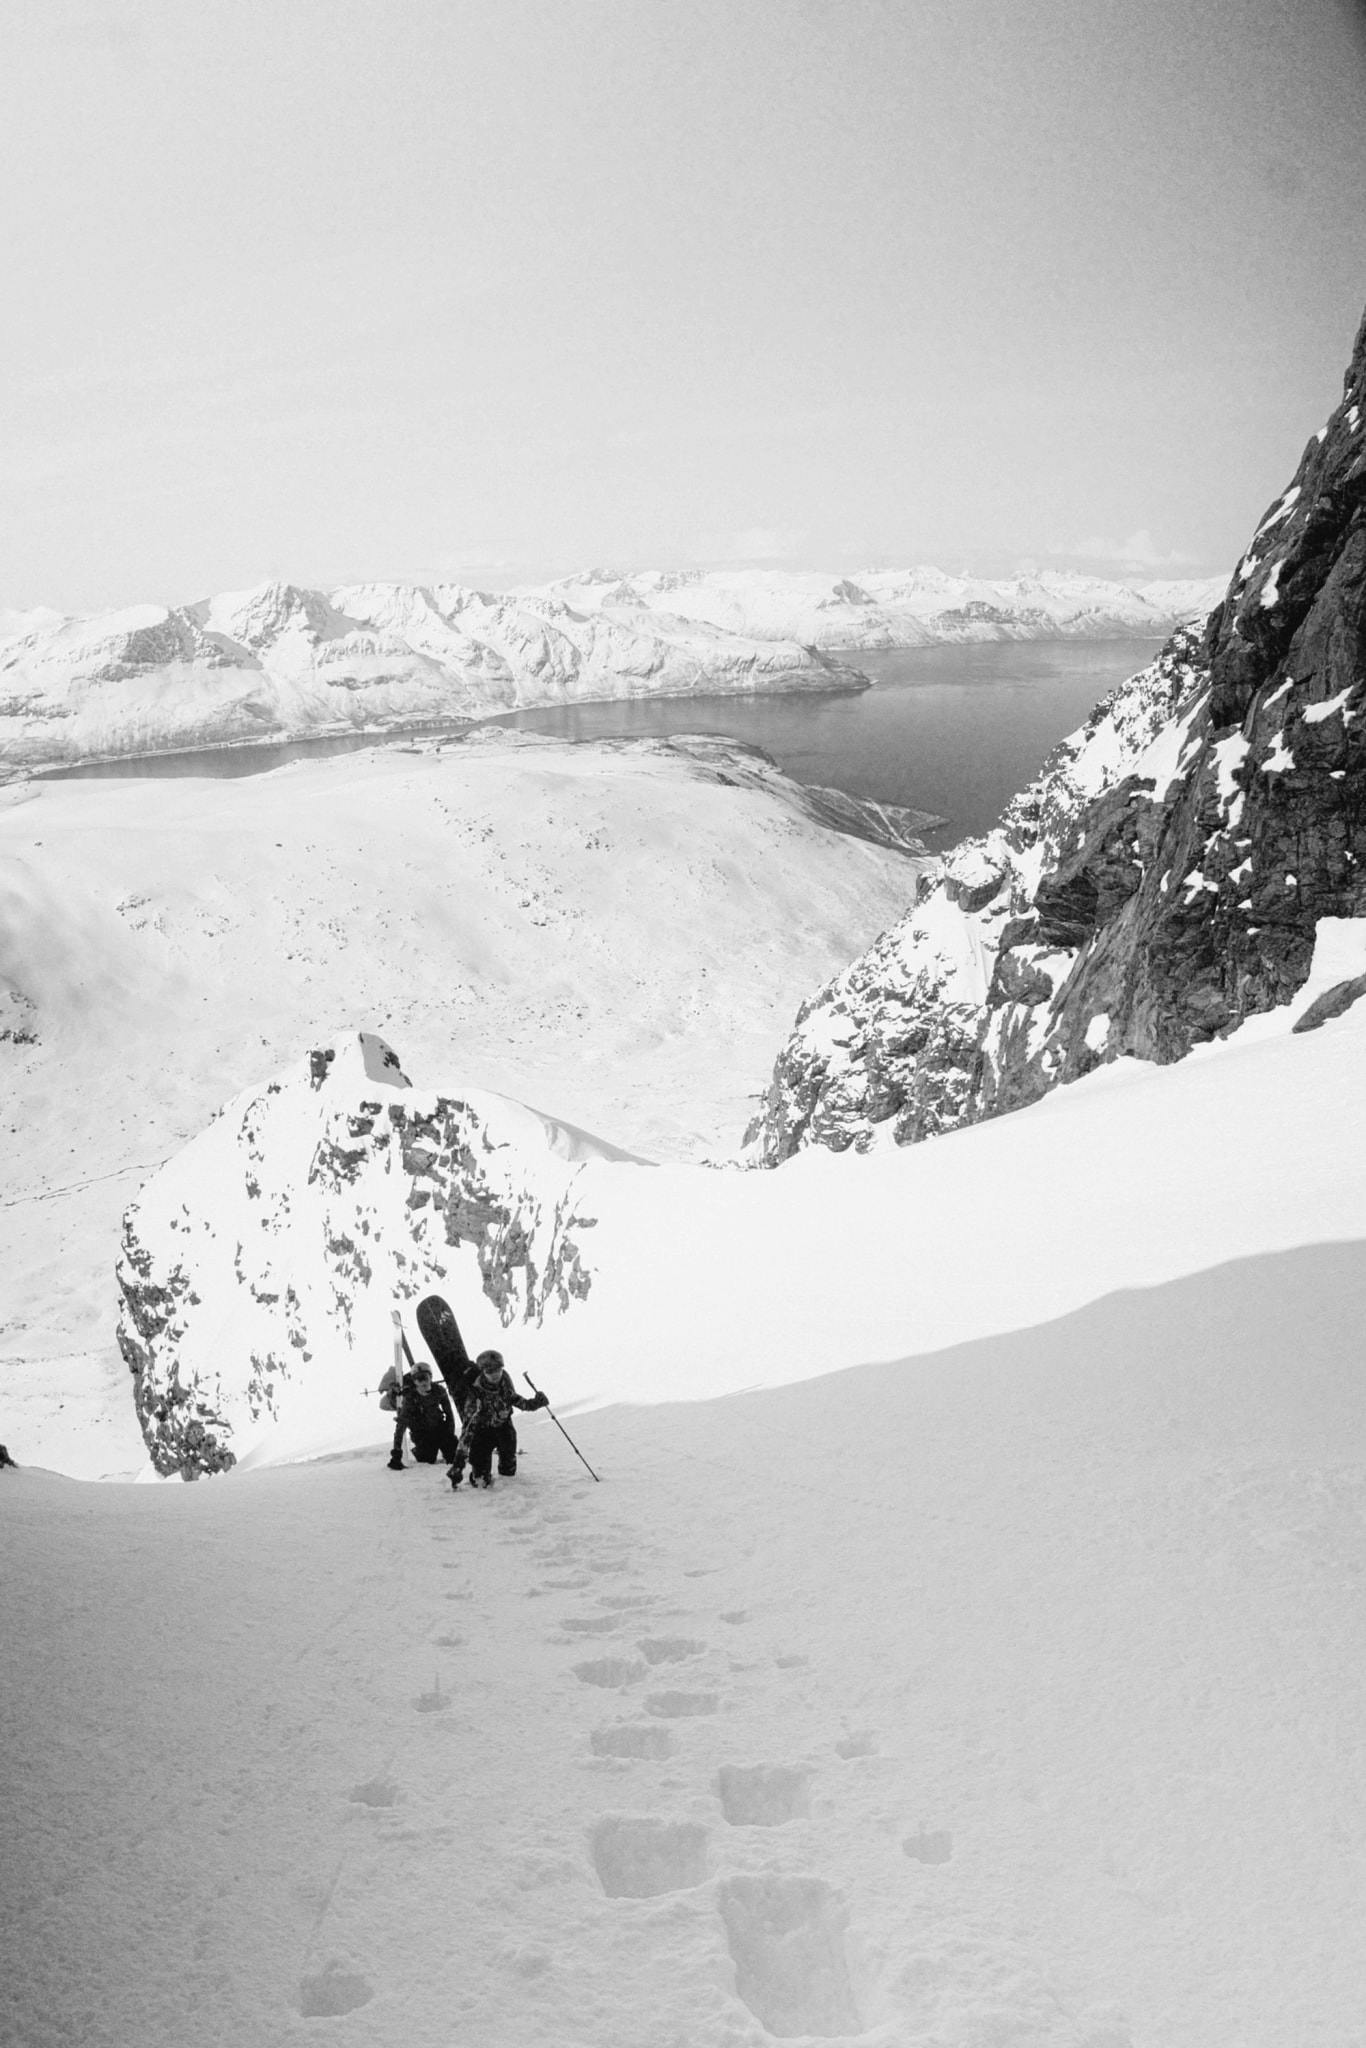 A photo down a snowy couloir with two climbers coming up